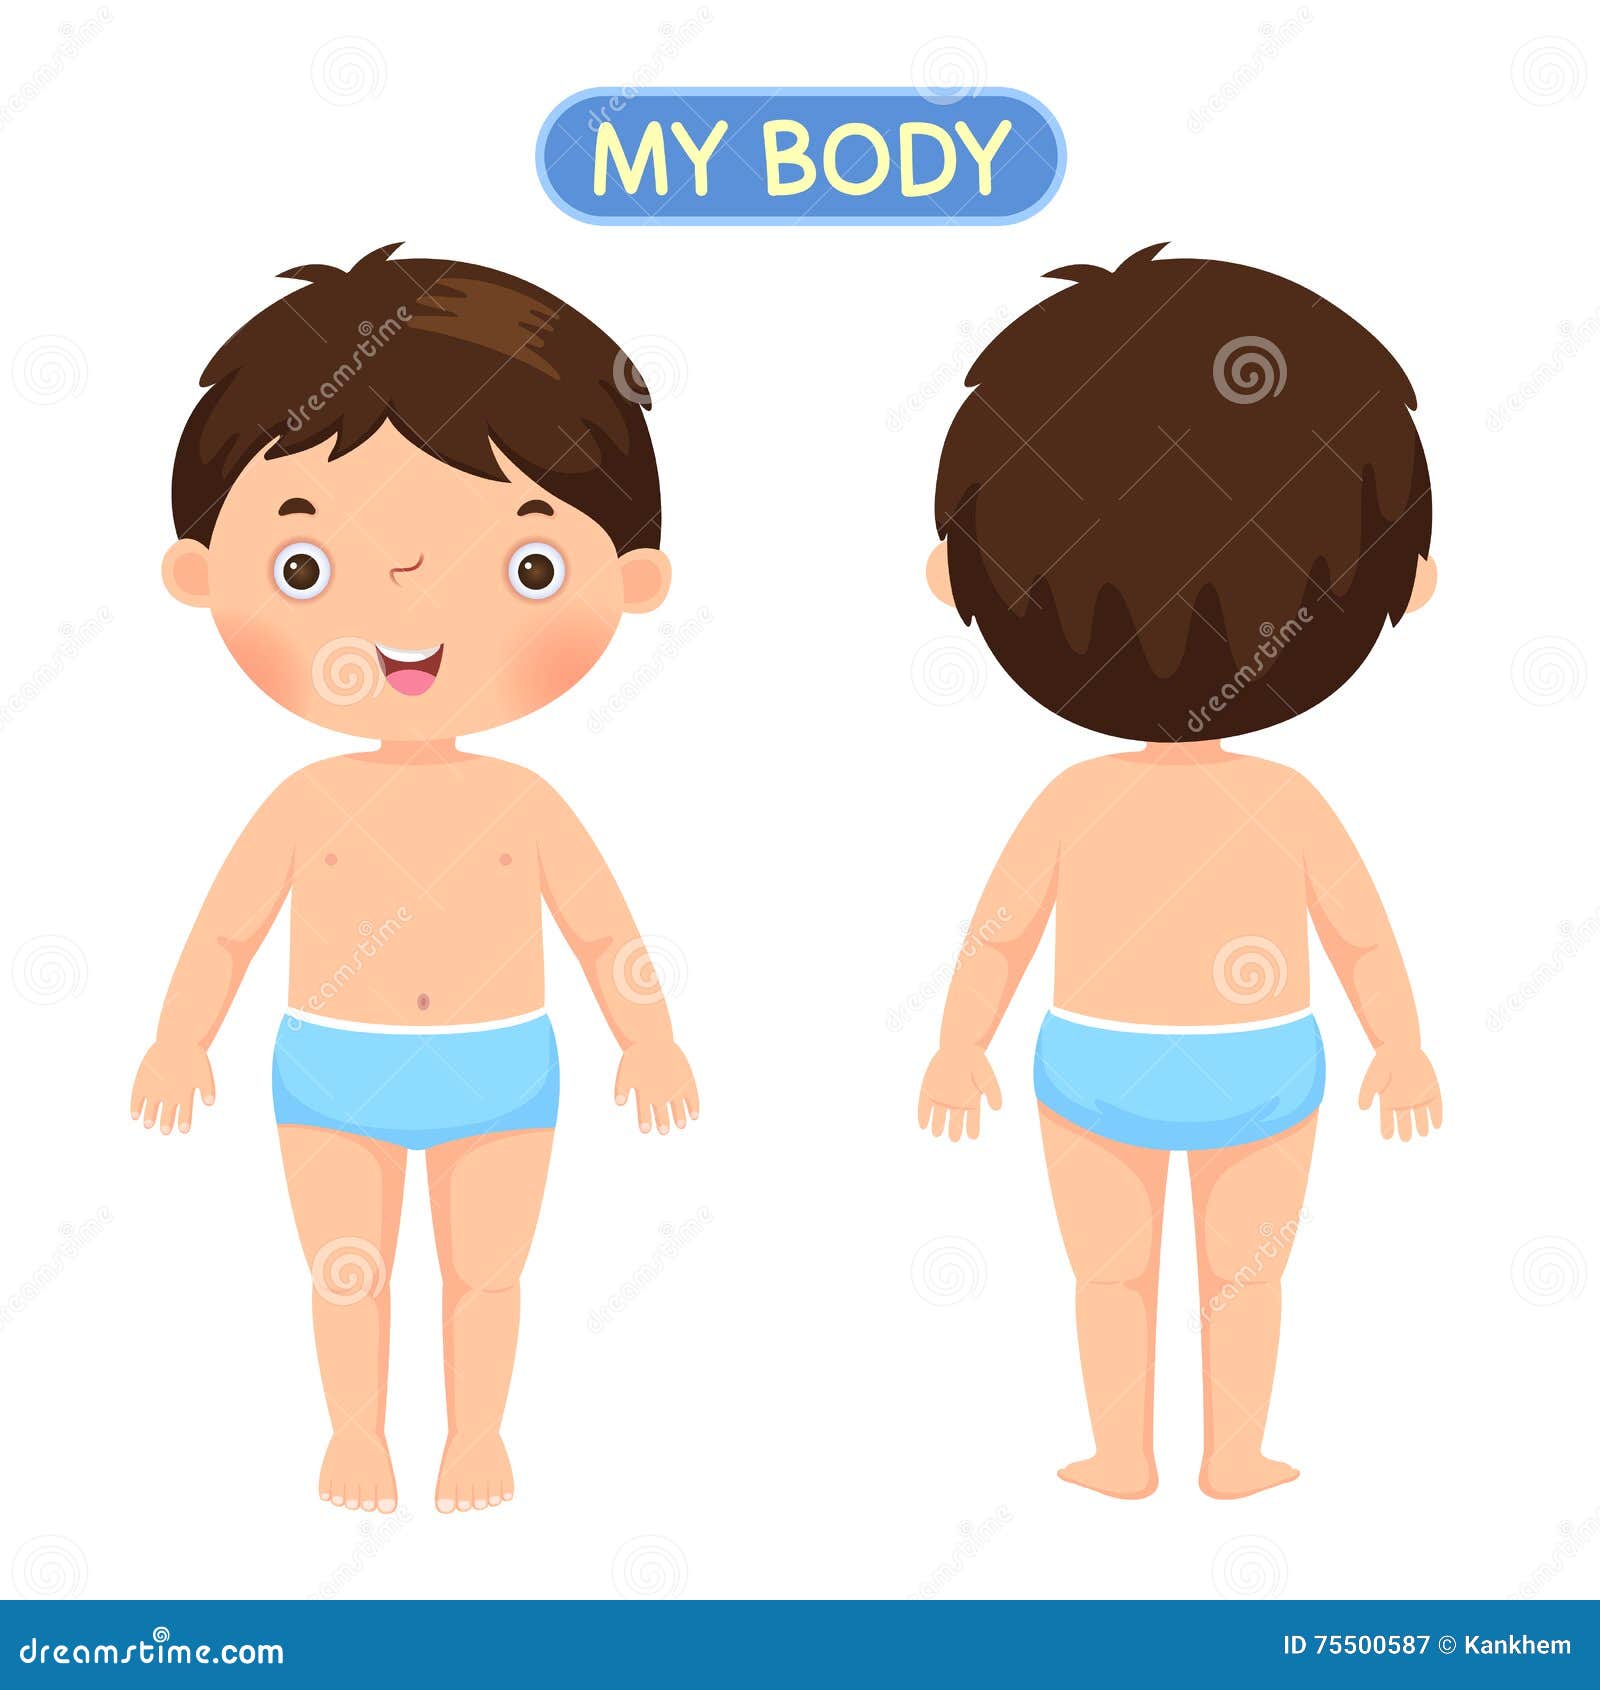 a boy showing parts of the body